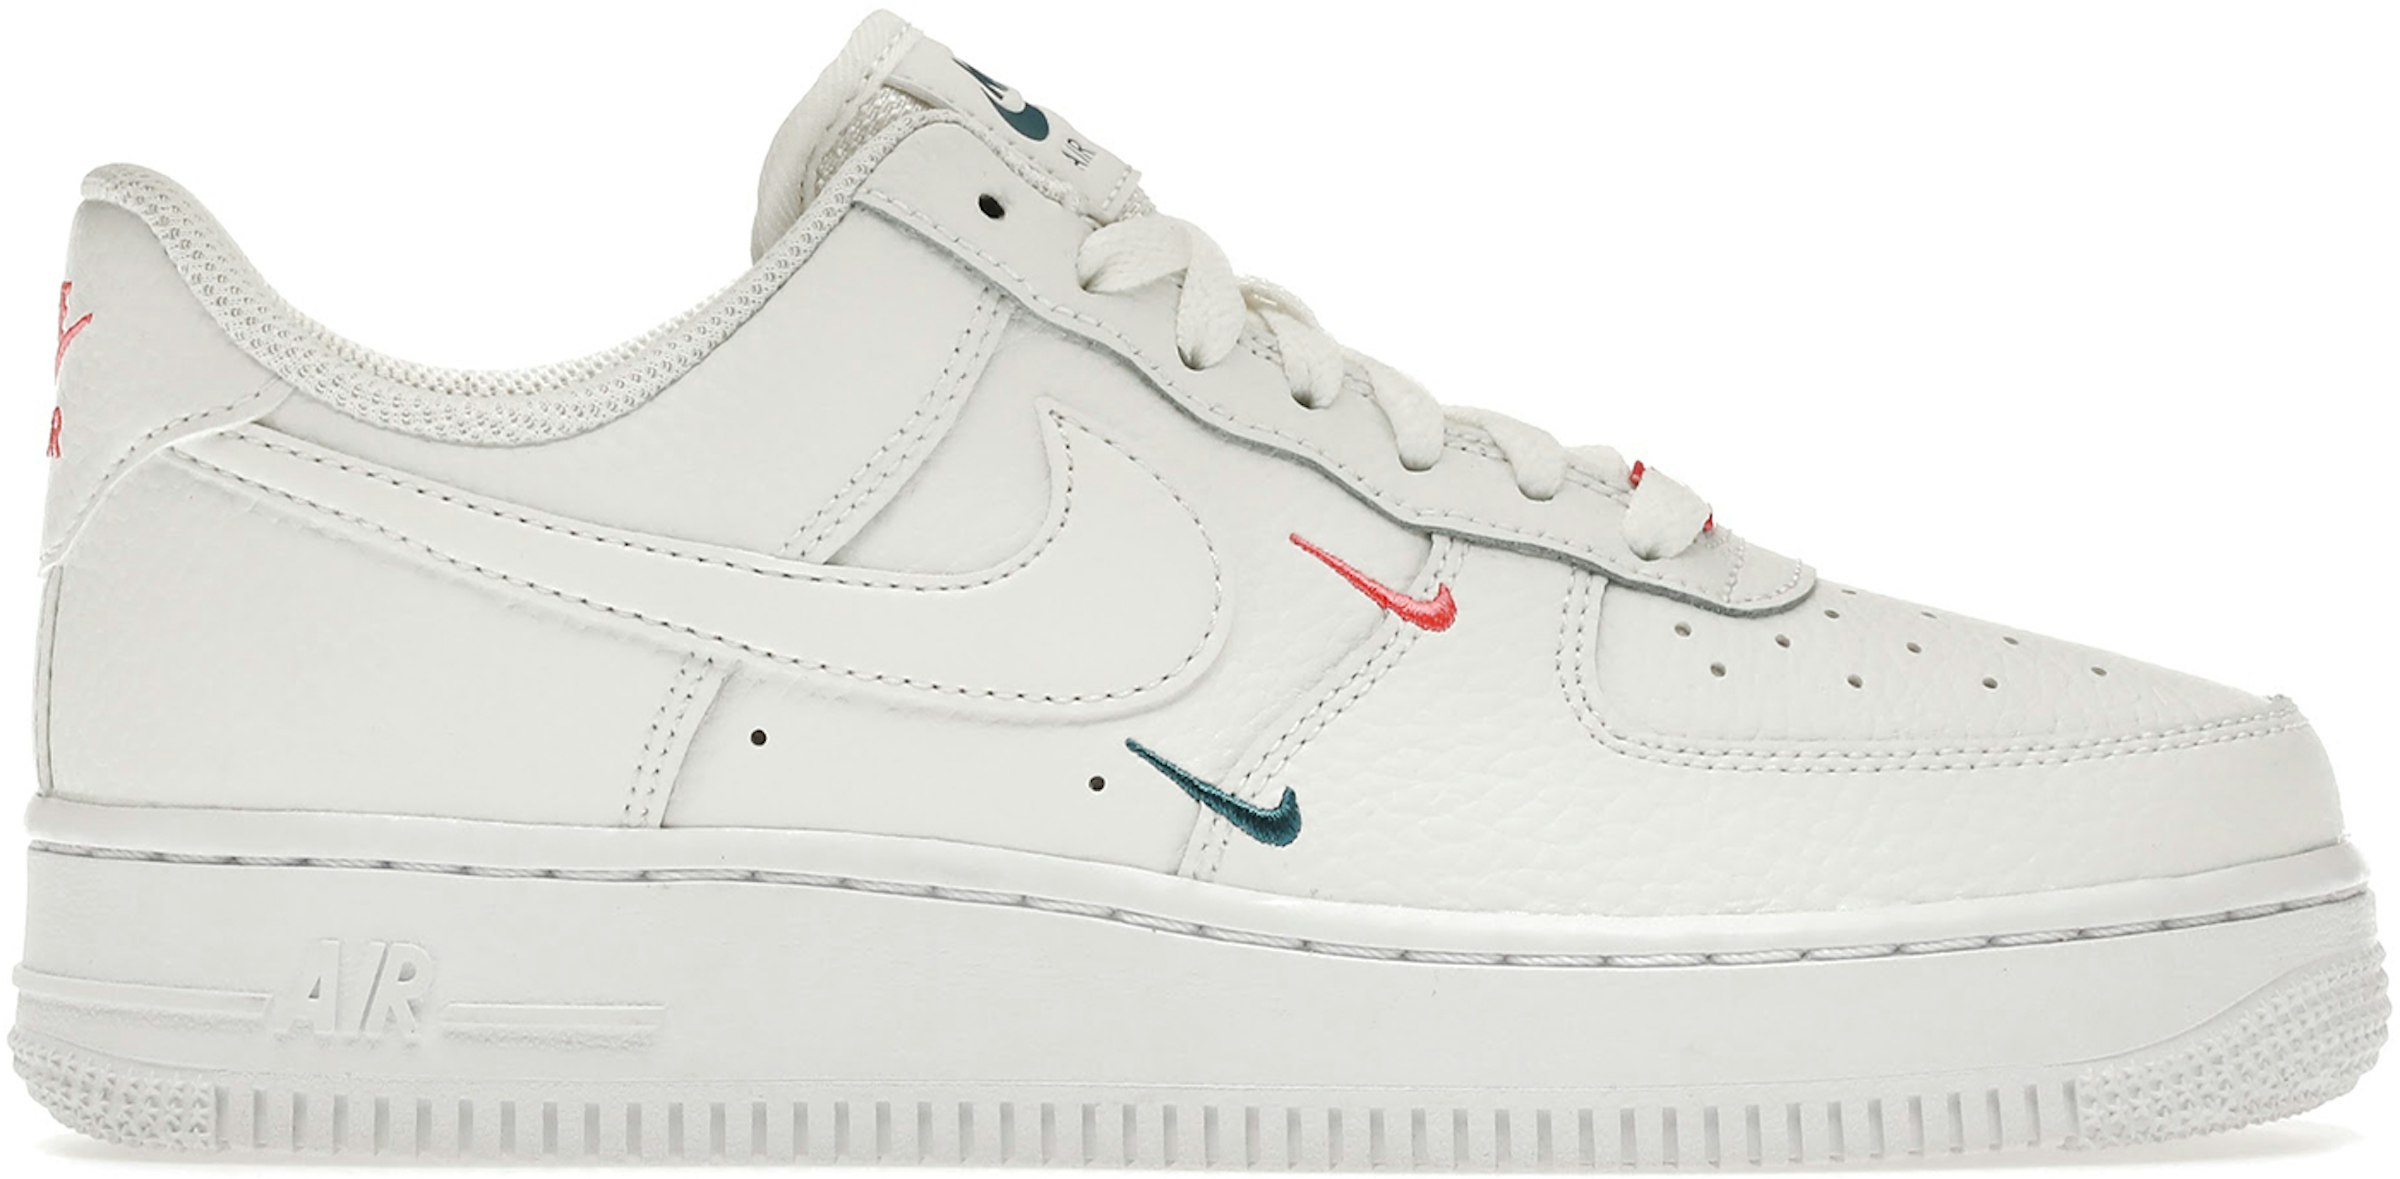 Nike Air Force 1 Low '07 Essential Double Mini Swoosh Miami Dolphins CT1989-101 - US